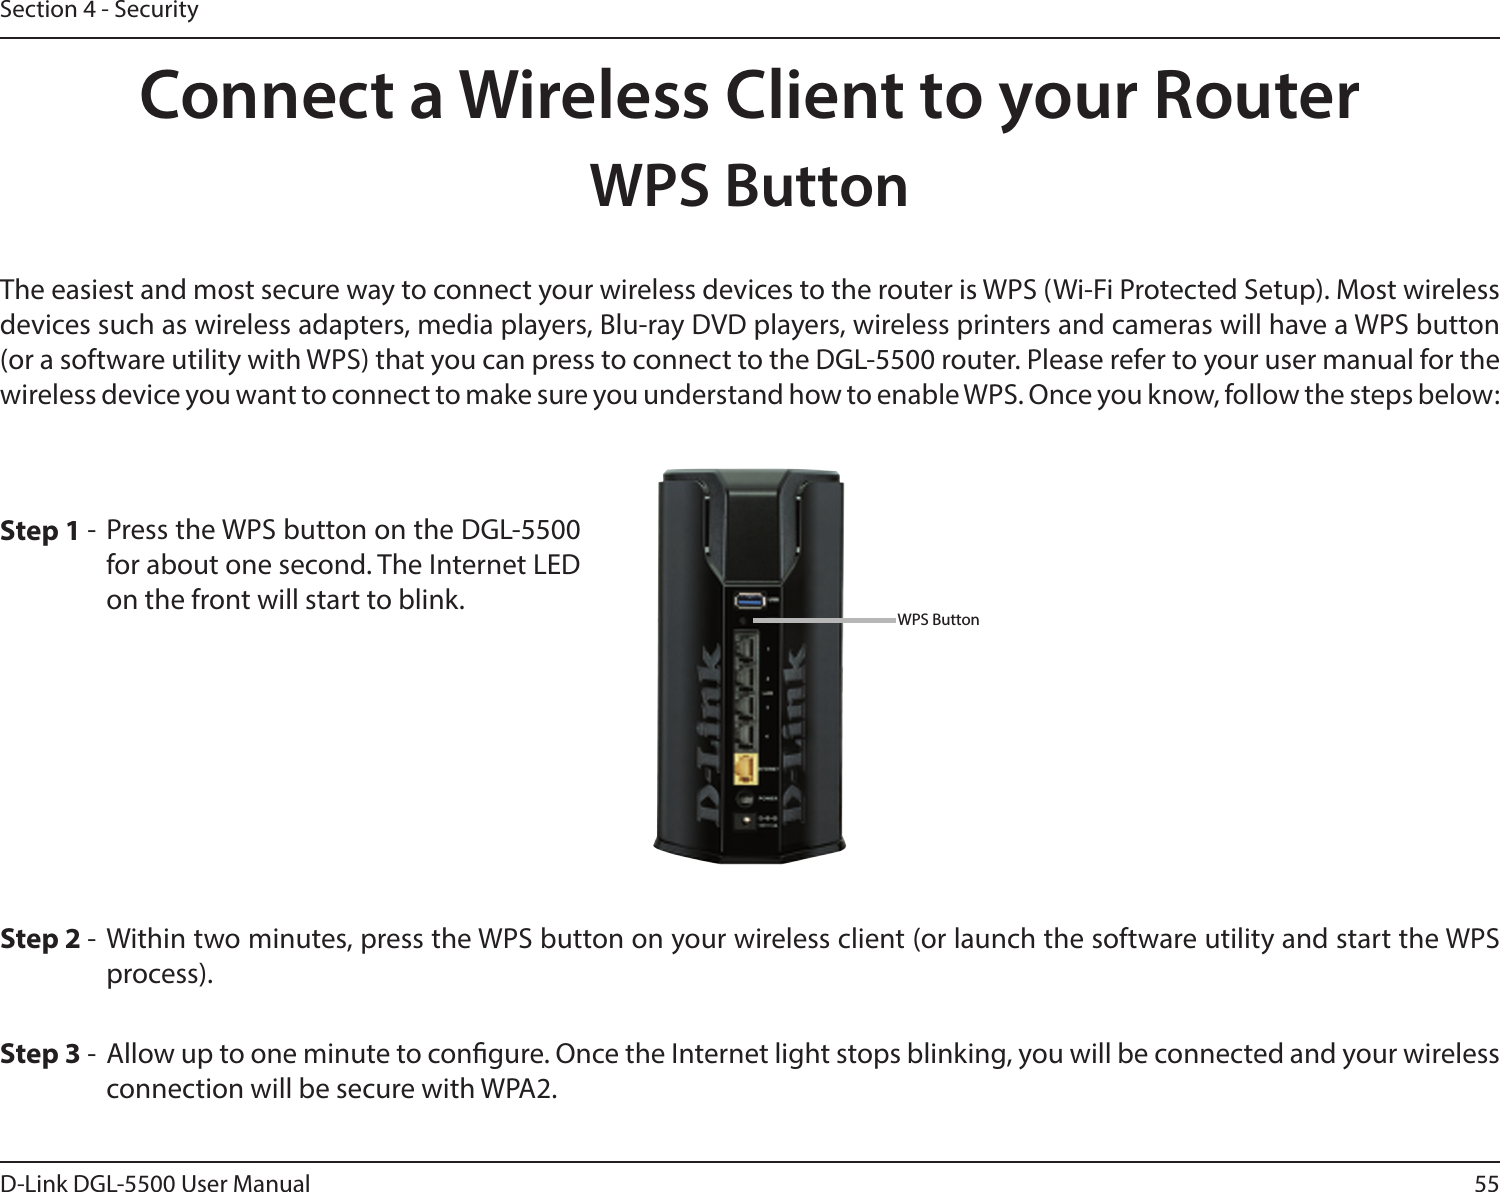 55D-Link DGL-5500 User ManualSection 4 - SecurityConnect a Wireless Client to your RouterWPS ButtonStep 2 - Within two minutes, press the WPS button on your wireless client (or launch the software utility and start the WPS process).The easiest and most secure way to connect your wireless devices to the router is WPS (Wi-Fi Protected Setup). Most wireless devices such as wireless adapters, media players, Blu-ray DVD players, wireless printers and cameras will have a WPS button (or a software utility with WPS) that you can press to connect to the DGL-5500 router. Please refer to your user manual for the wireless device you want to connect to make sure you understand how to enable WPS. Once you know, follow the steps below:Step 1 - Press the WPS button on the DGL-5500 for about one second. The Internet LED on the front will start to blink.Step 3 -  Allow up to one minute to congure. Once the Internet light stops blinking, you will be connected and your wireless connection will be secure with WPA2.WPS Button